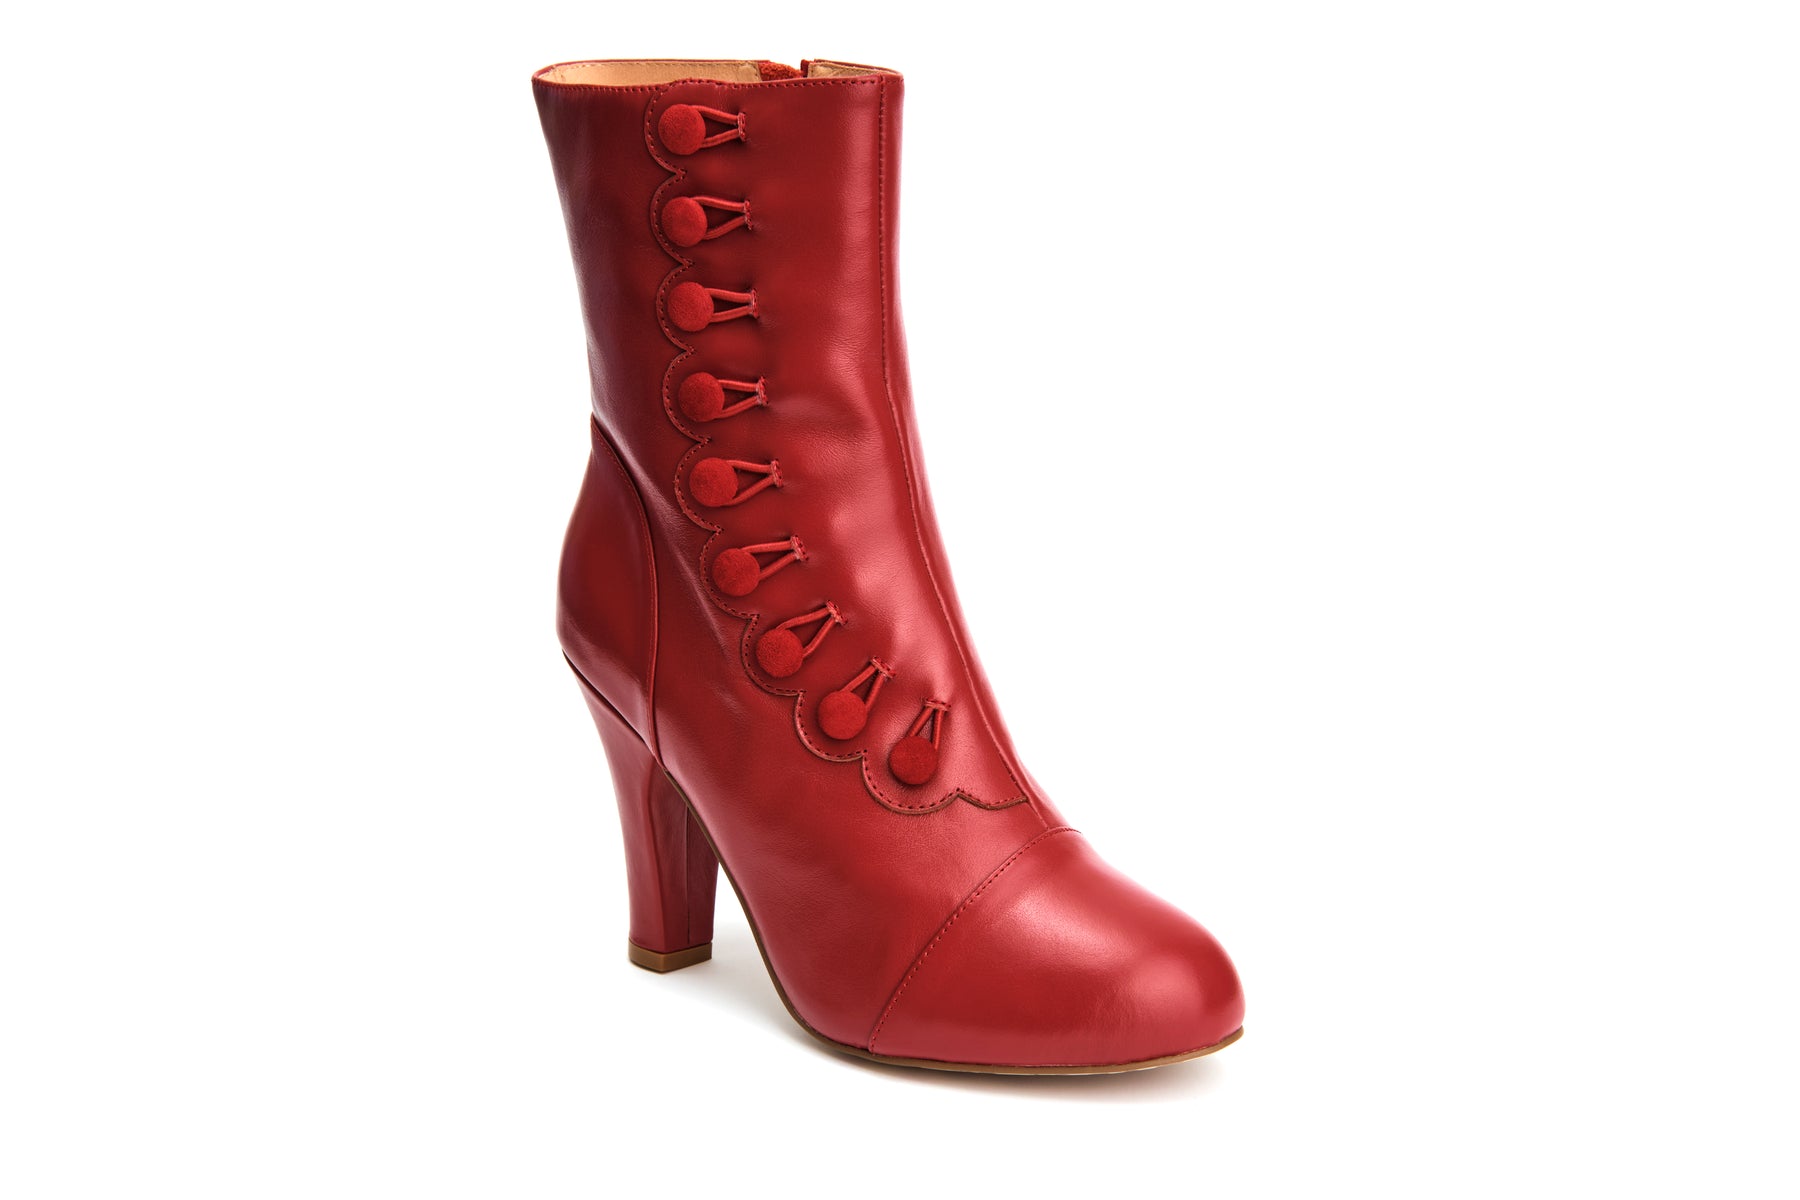 June Josephine a classy red leather boot